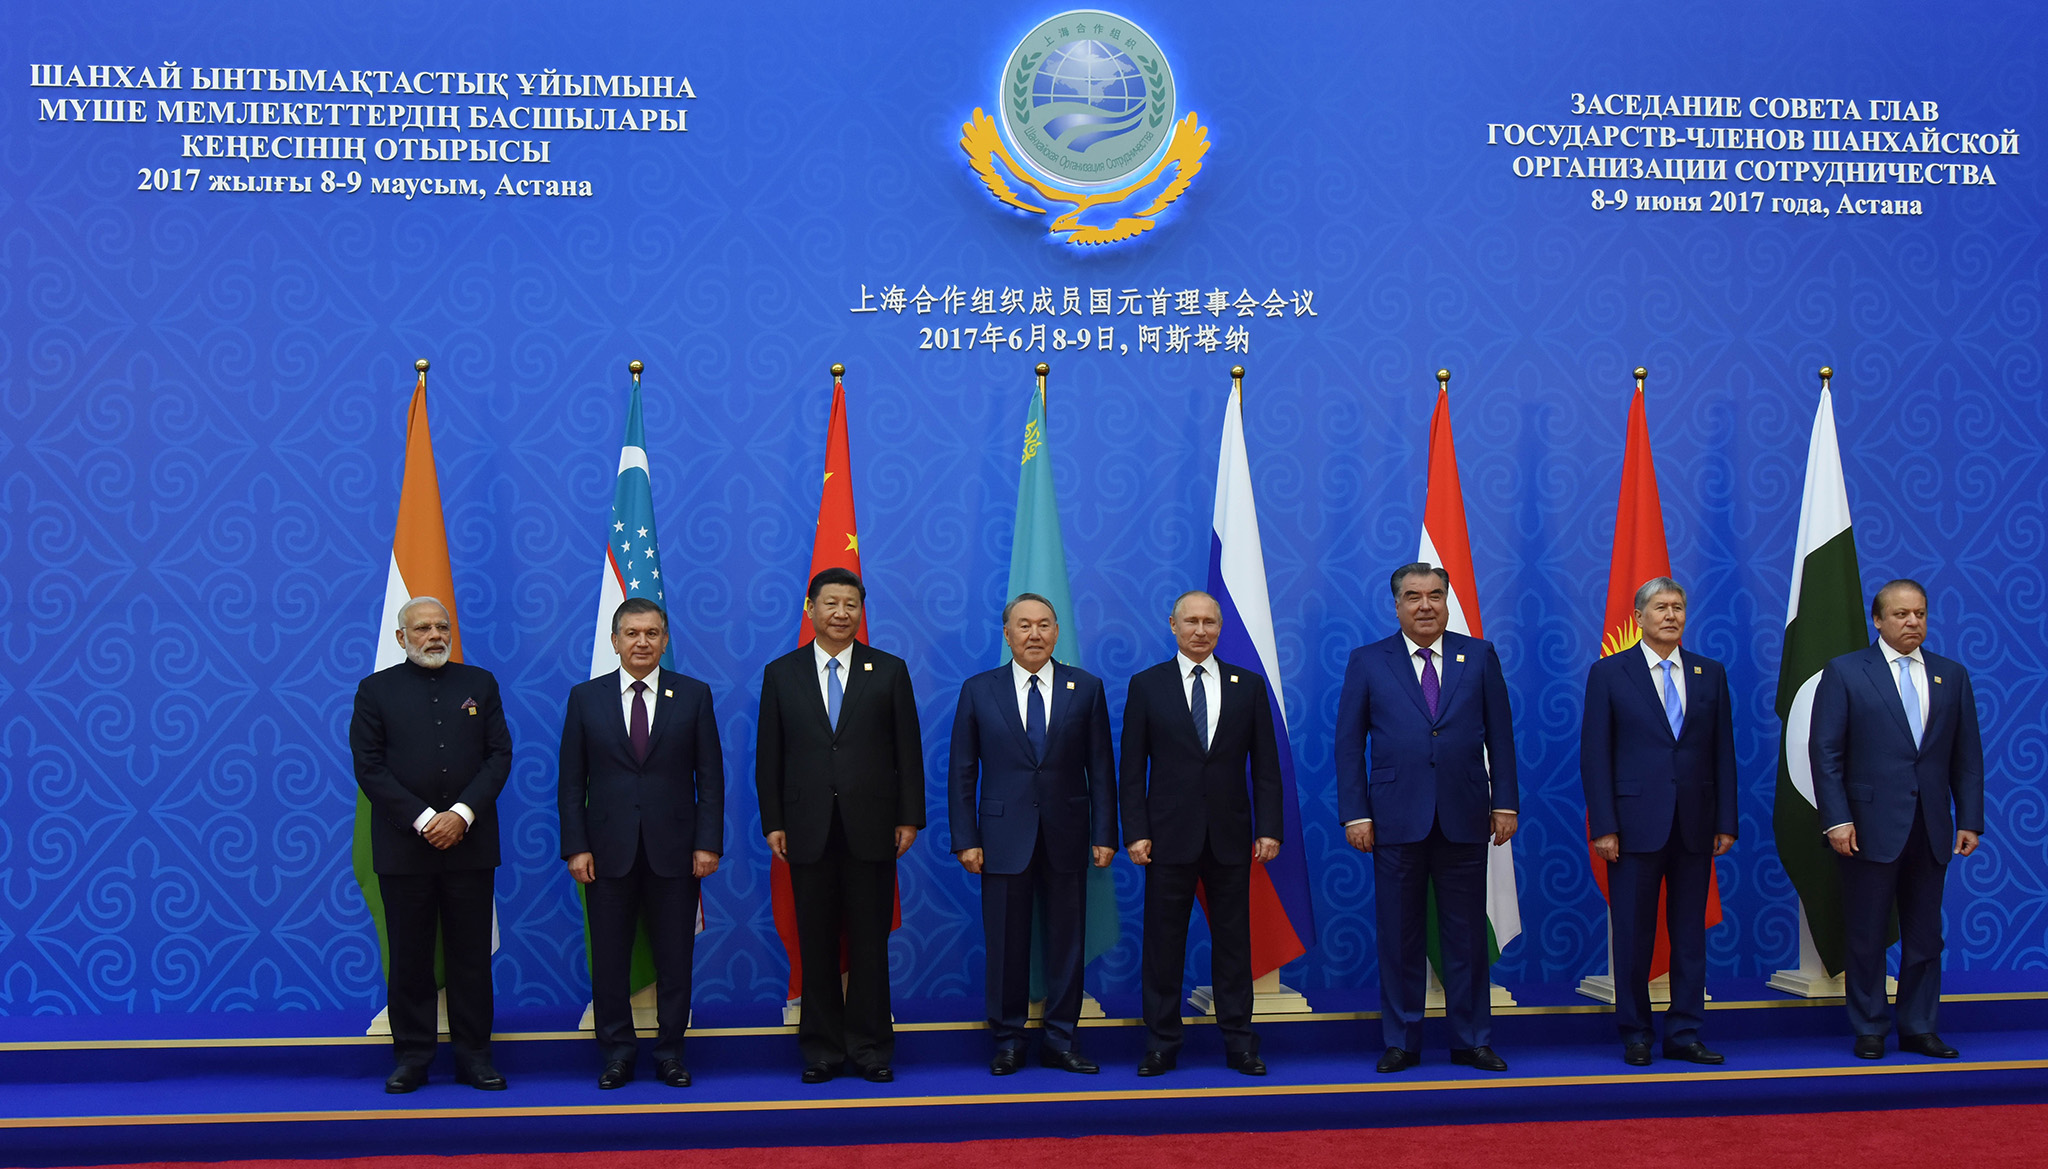 Shanghai Cooperation Organization heads of state at the group’s 2017 summit in Astana, Kazakhstan. (Indian Ministry of External Affairs)